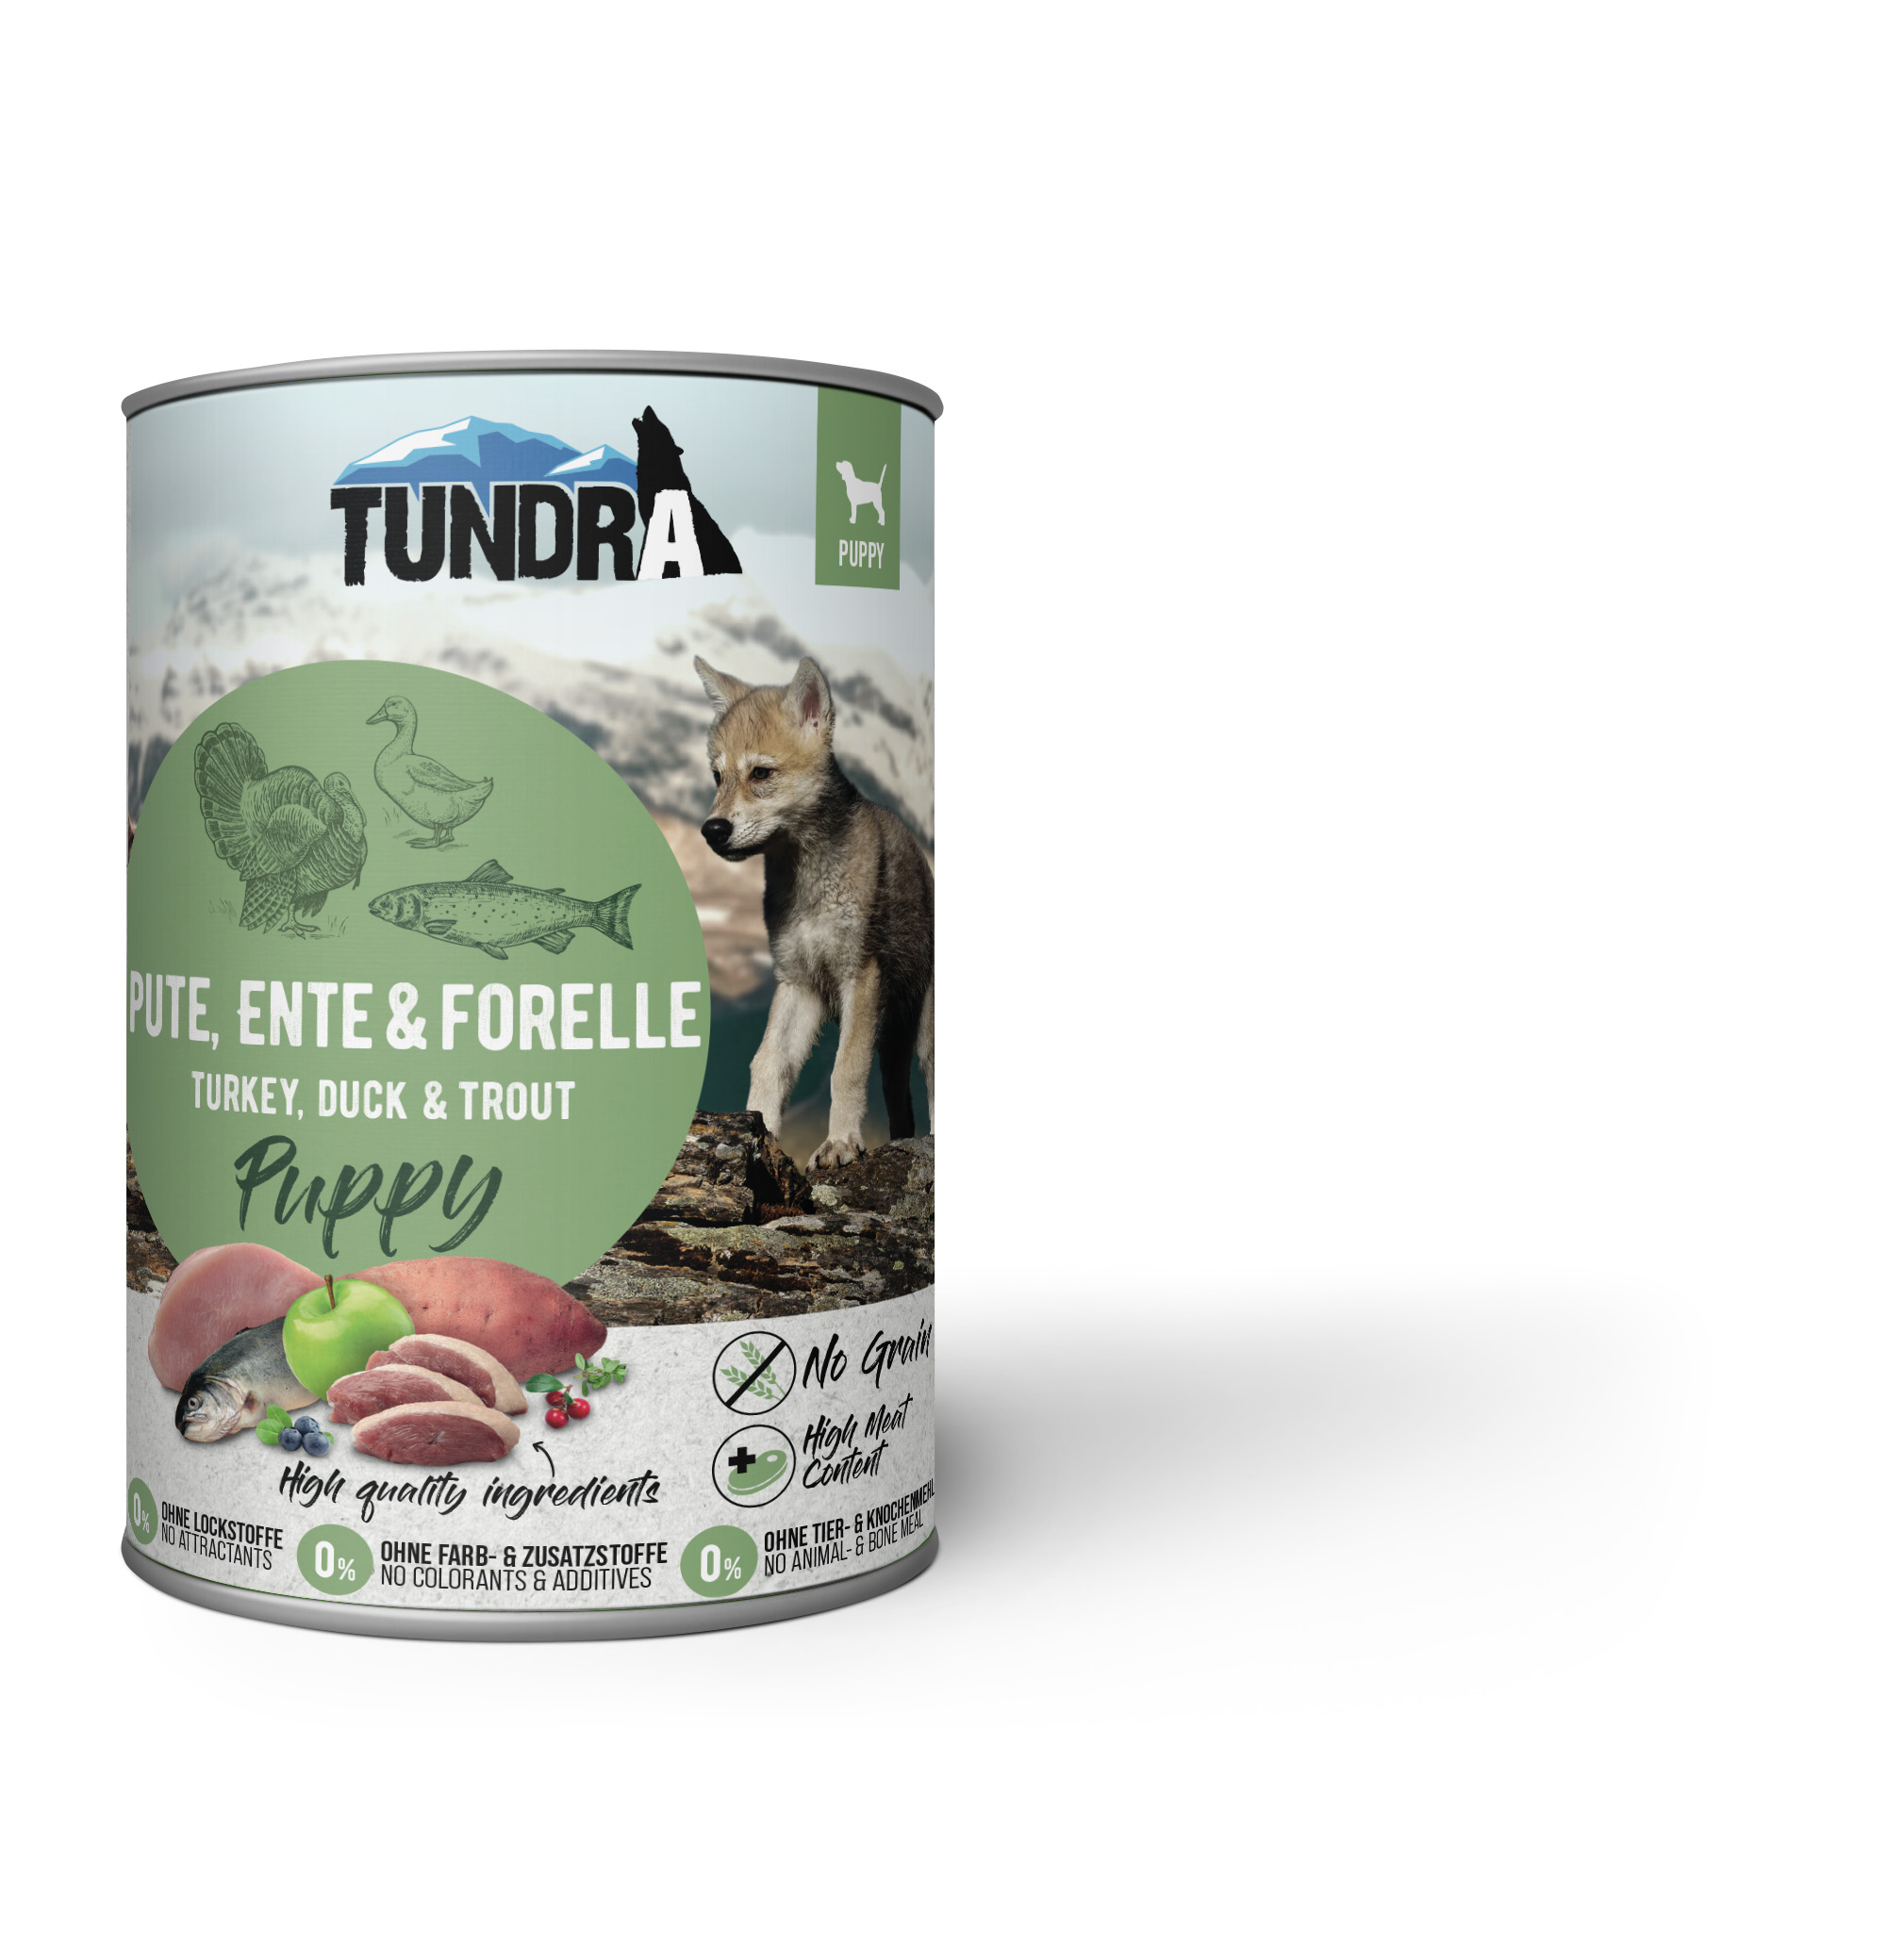 Tundra Dog Puppy Pute, Ente & Forelle 400g